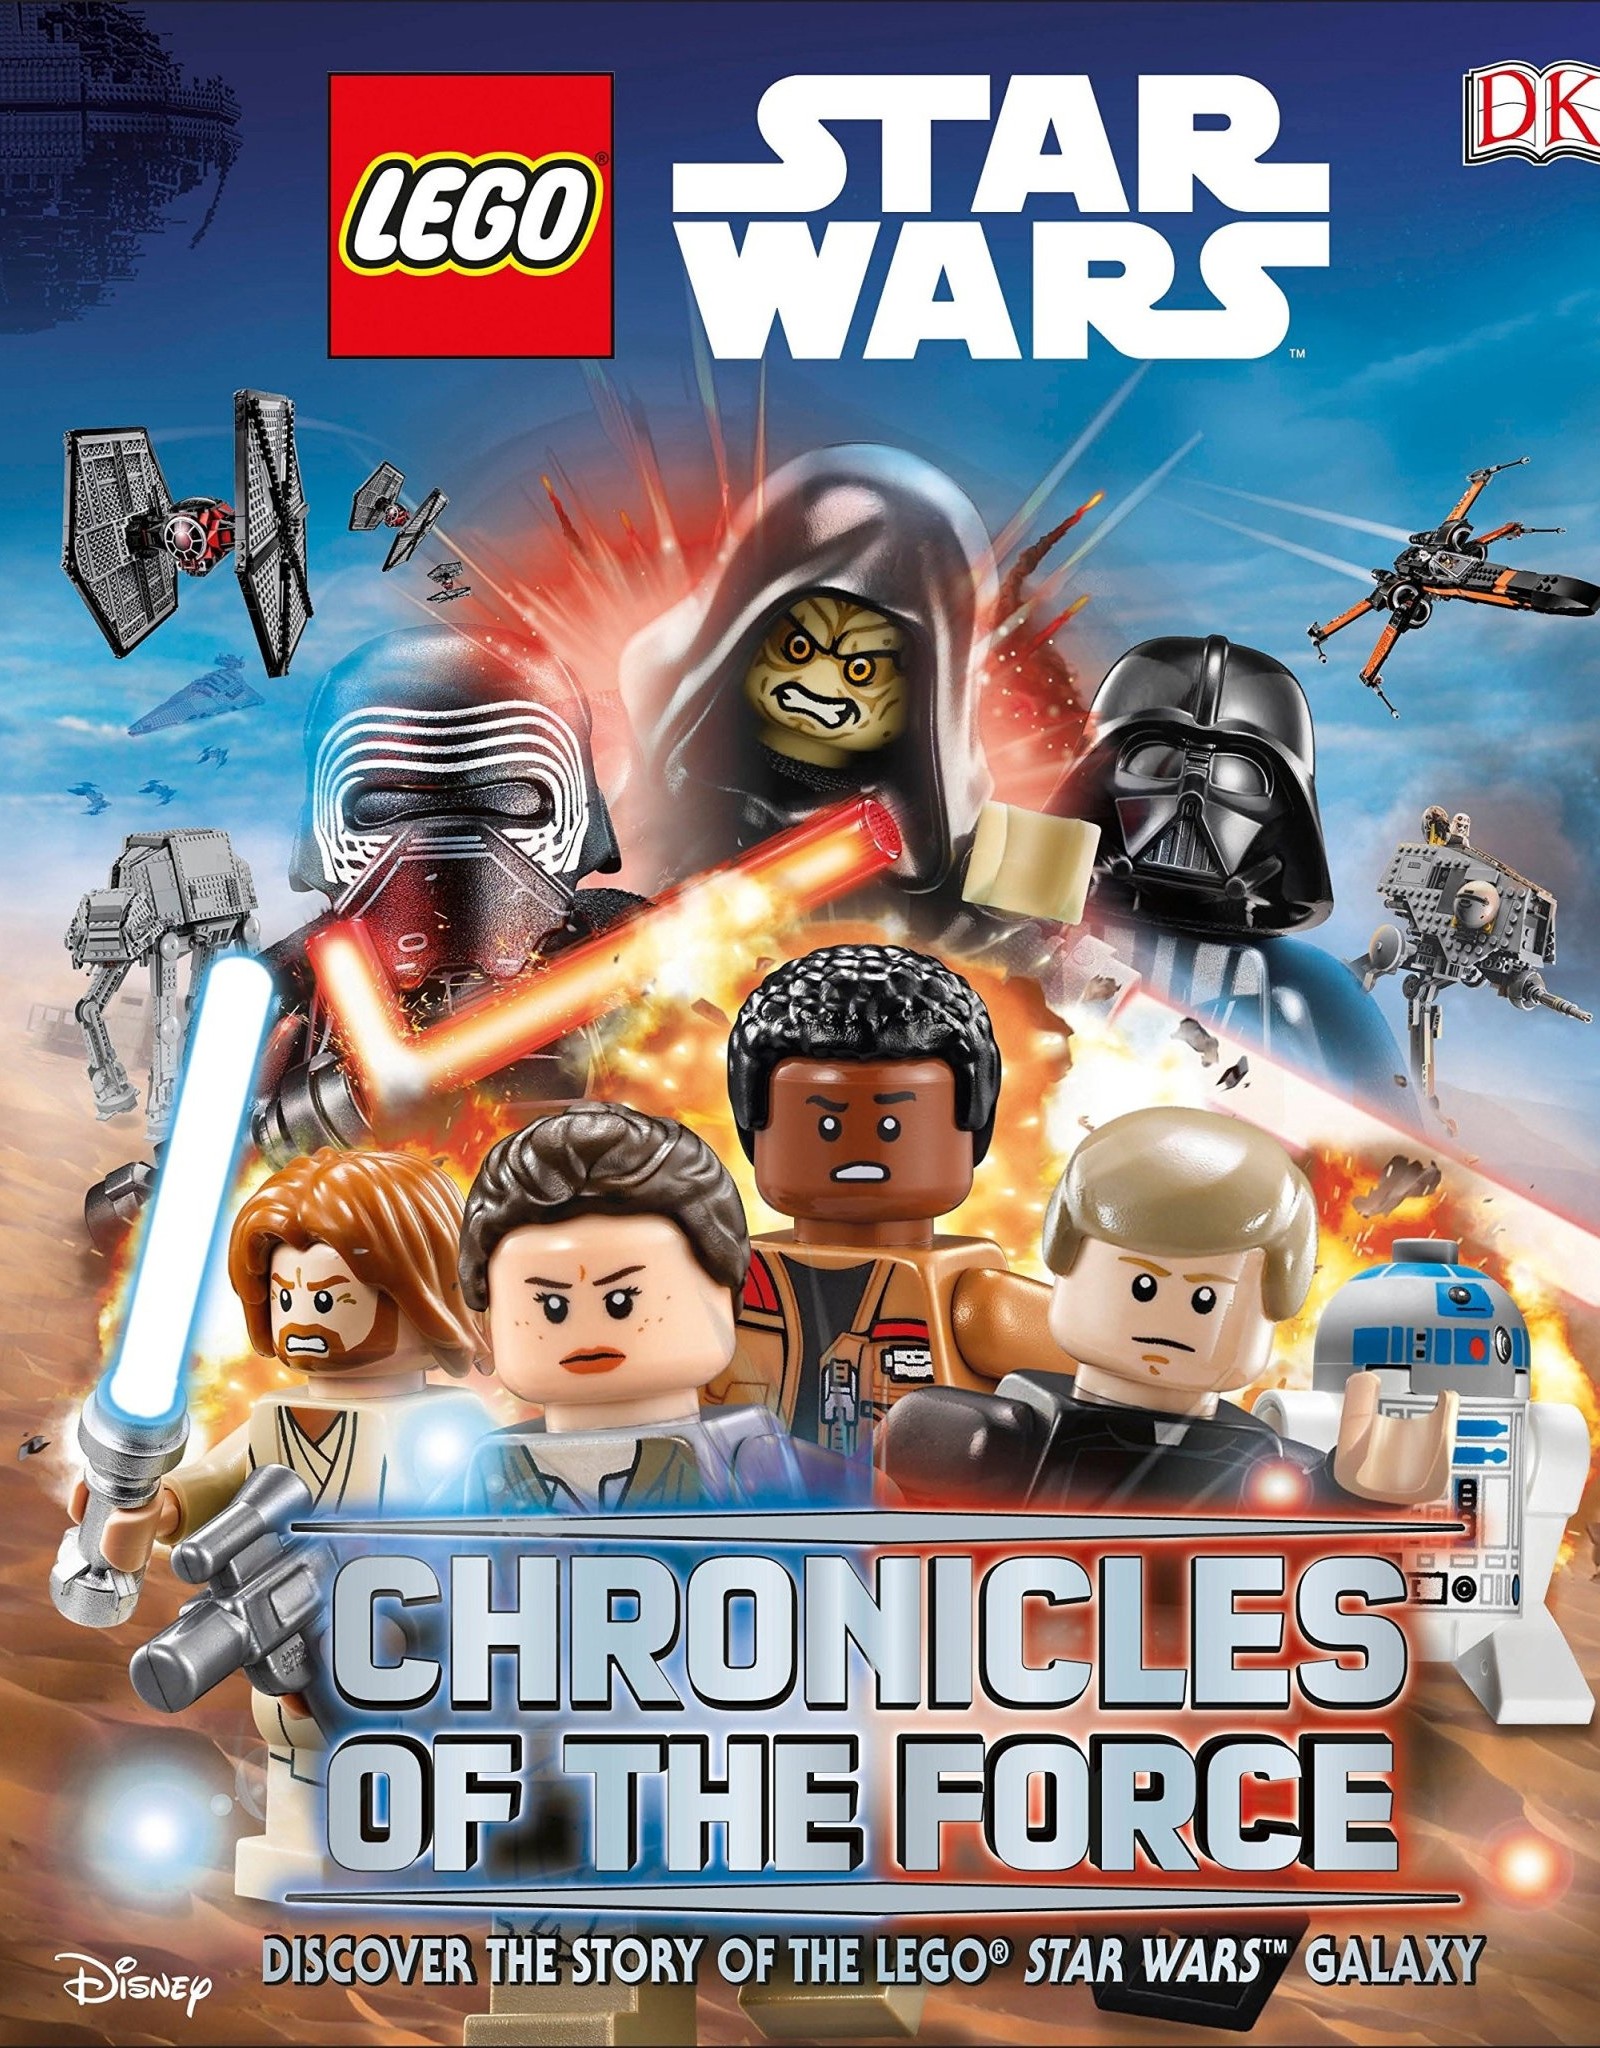 LEGO Classic Lego Star Wars Chronicles of the Force Book